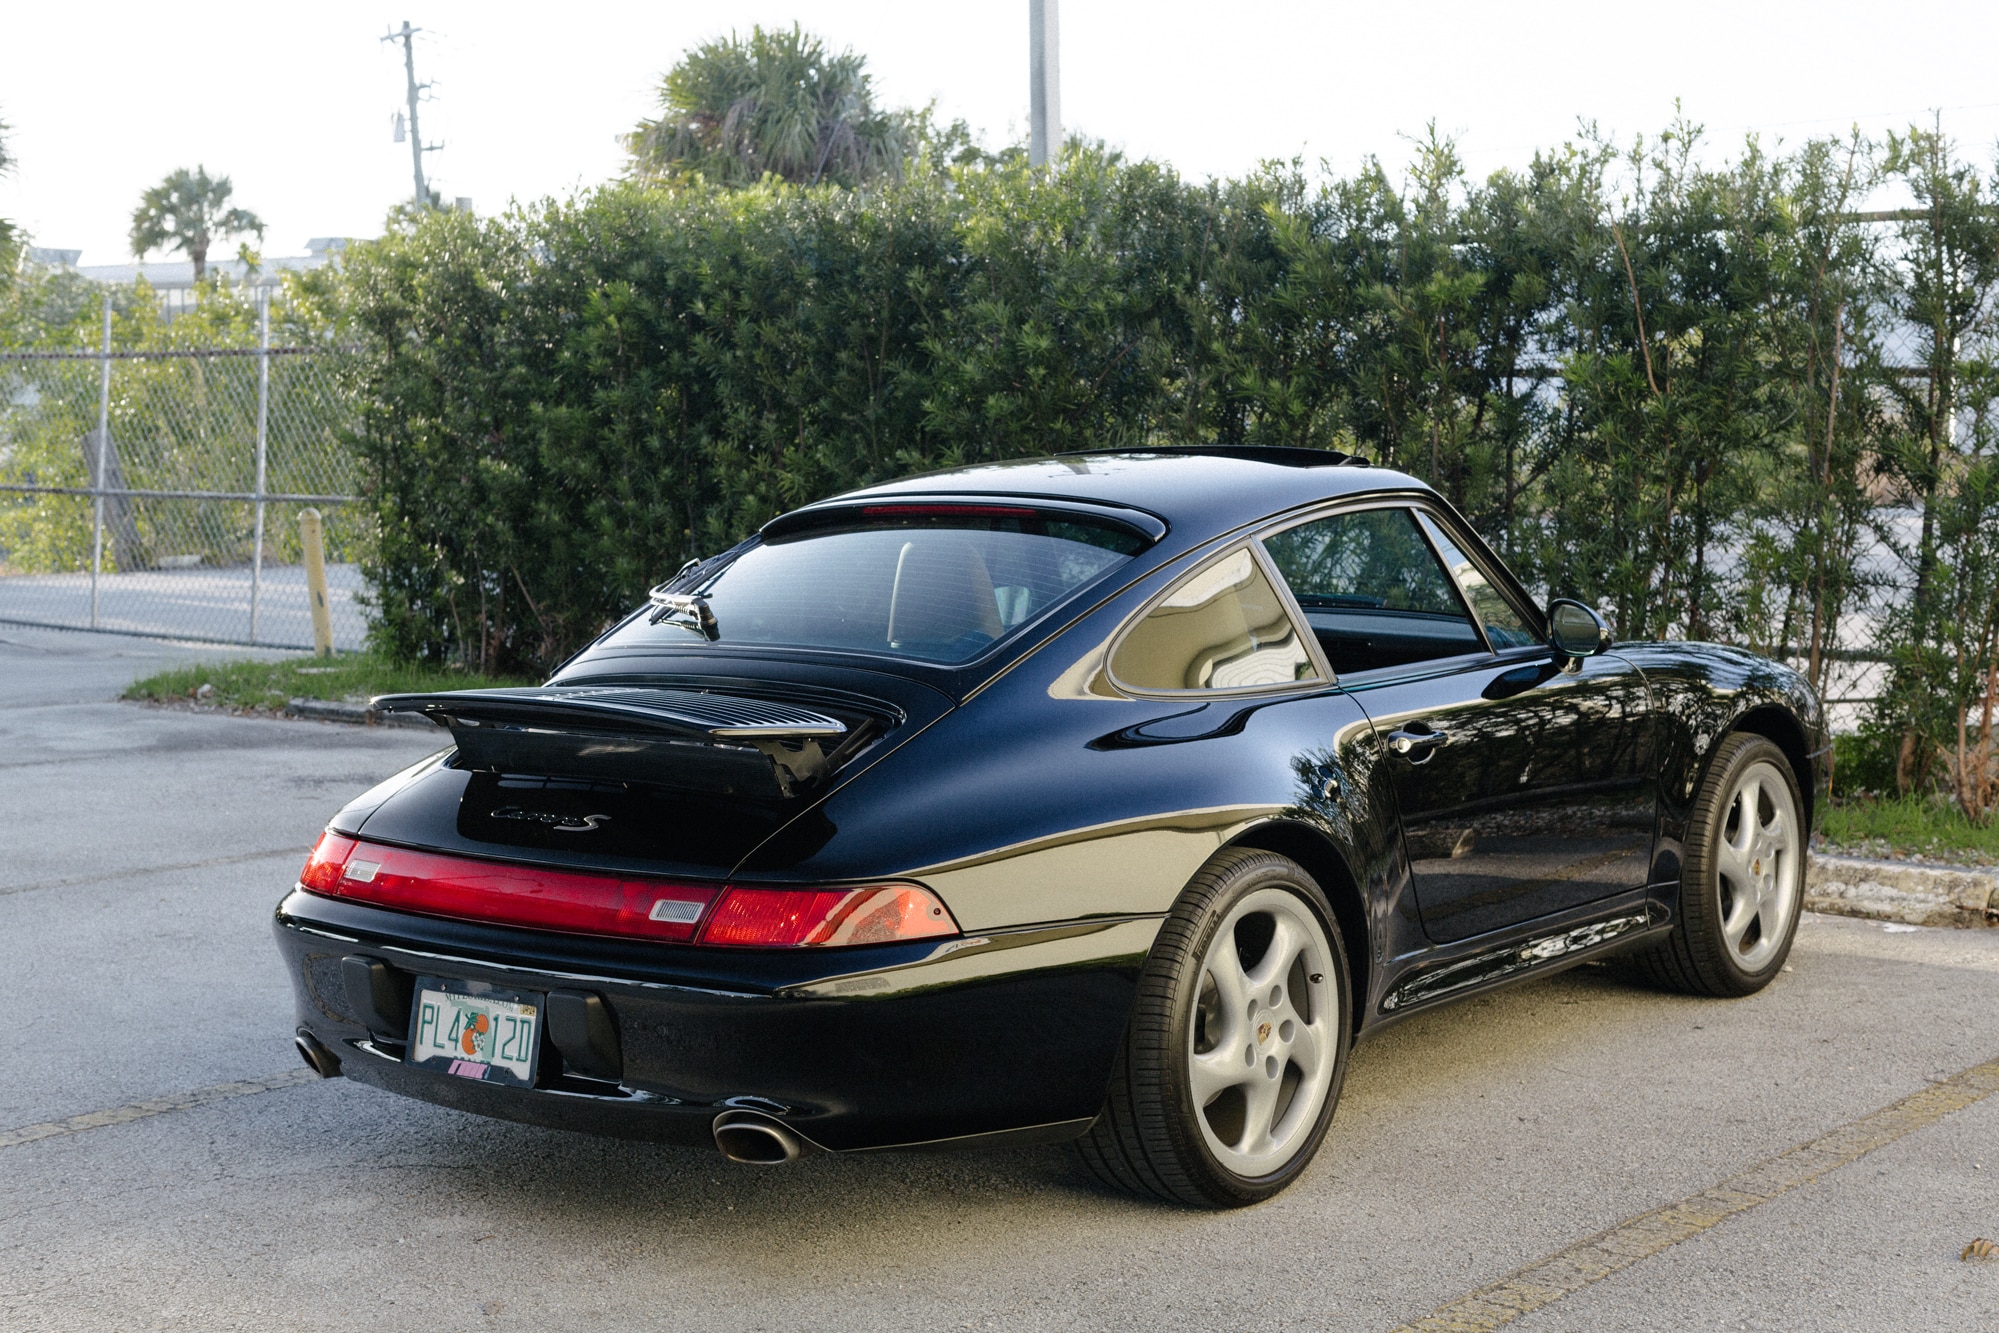 1998 Porsche 911 C2S (993) | Desirable Color Combination | 1 of 993 | Split Grill | 6 Speed Manual | Showroom Condition | Final Year of the Aircooled 911!